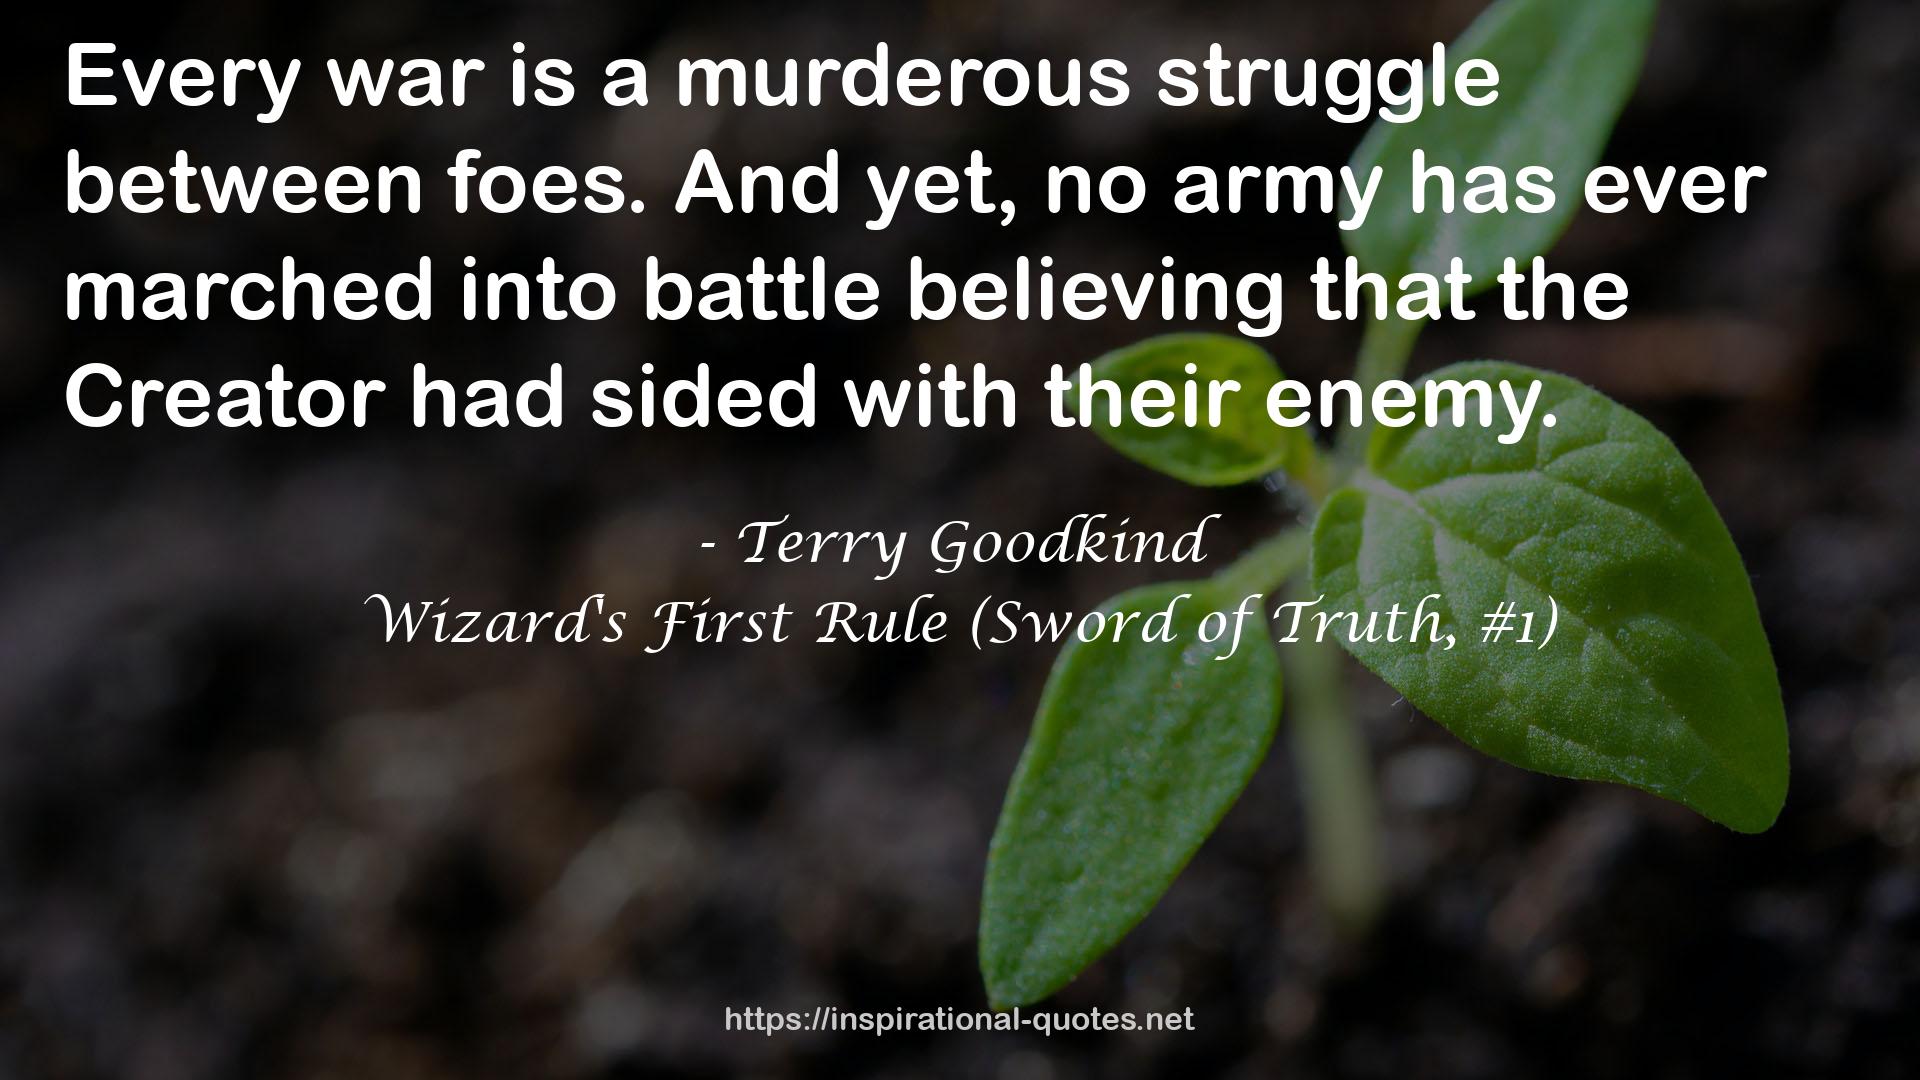 Terry Goodkind QUOTES